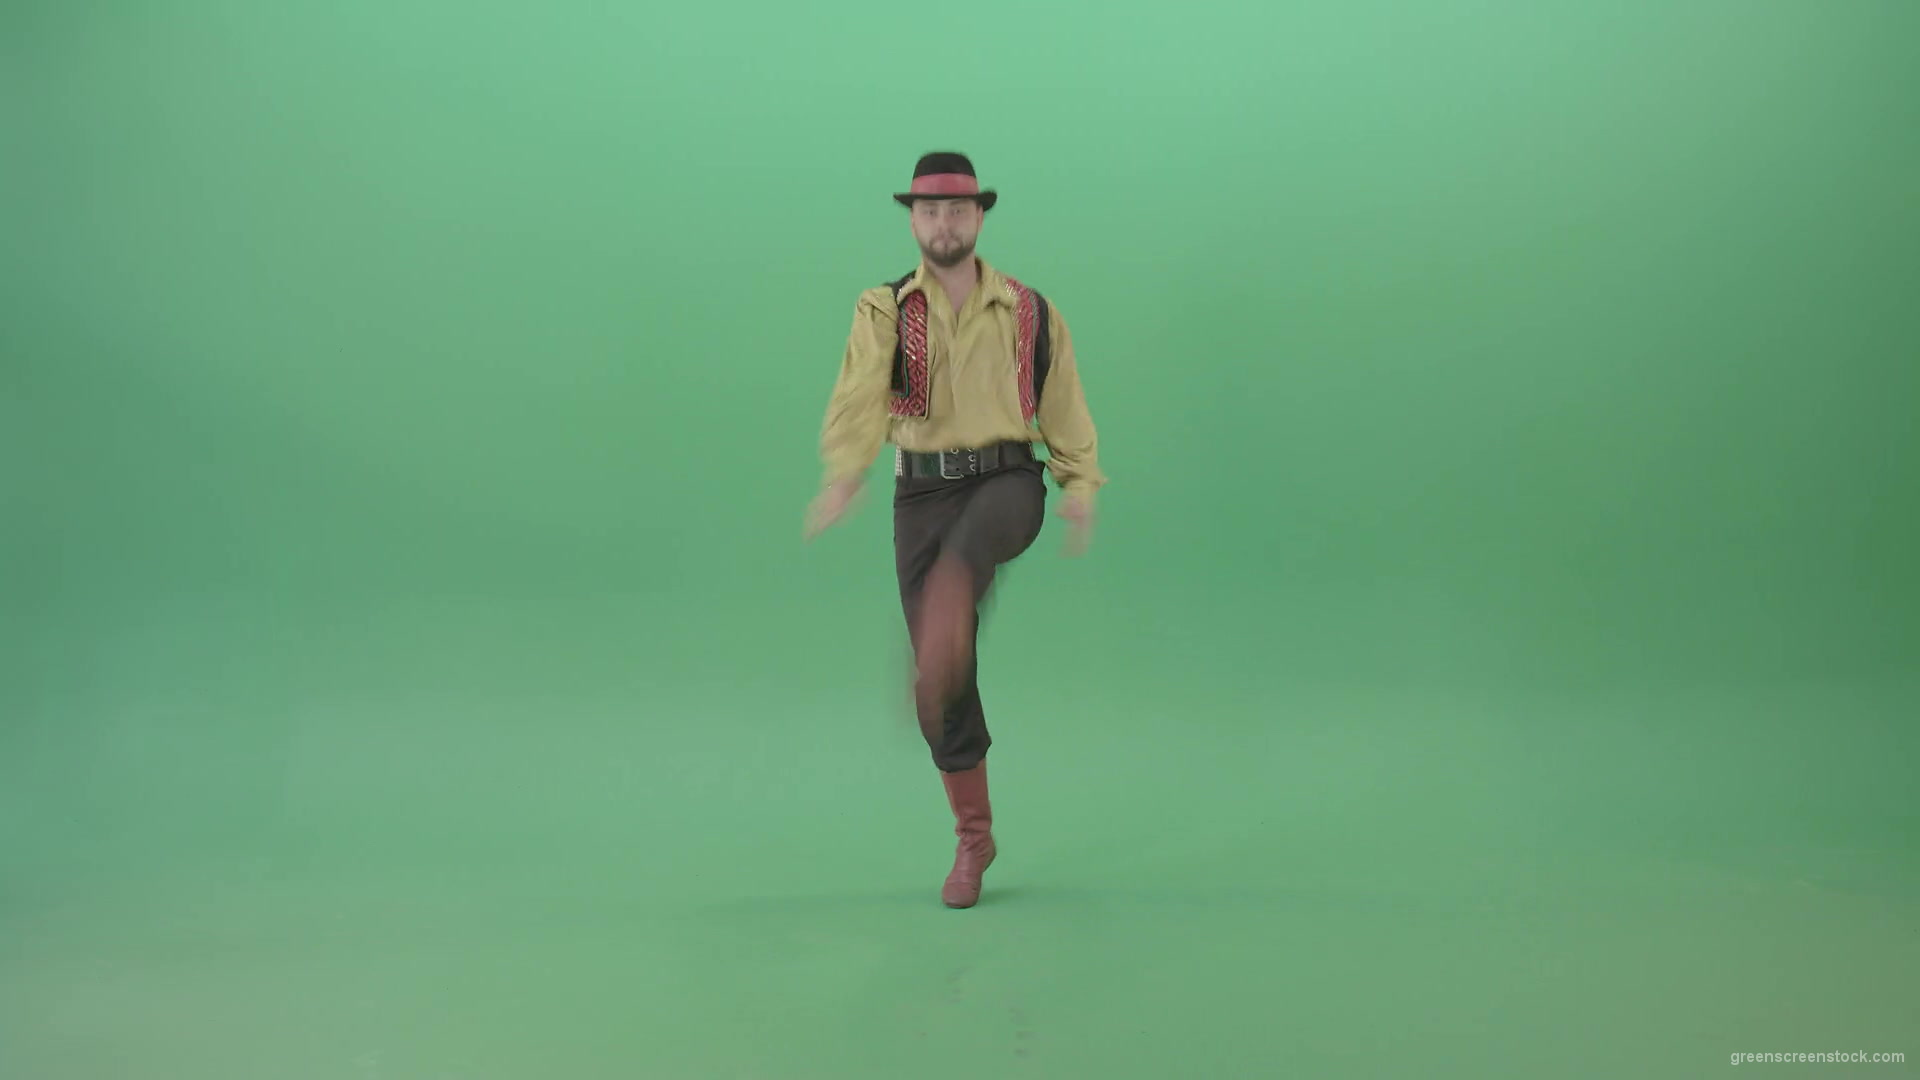 Funny-dancing-Gipsy-in-Moldova-jumping-isolated-on-Green-Screen-4K-Video-Footage-1920_005 Green Screen Stock